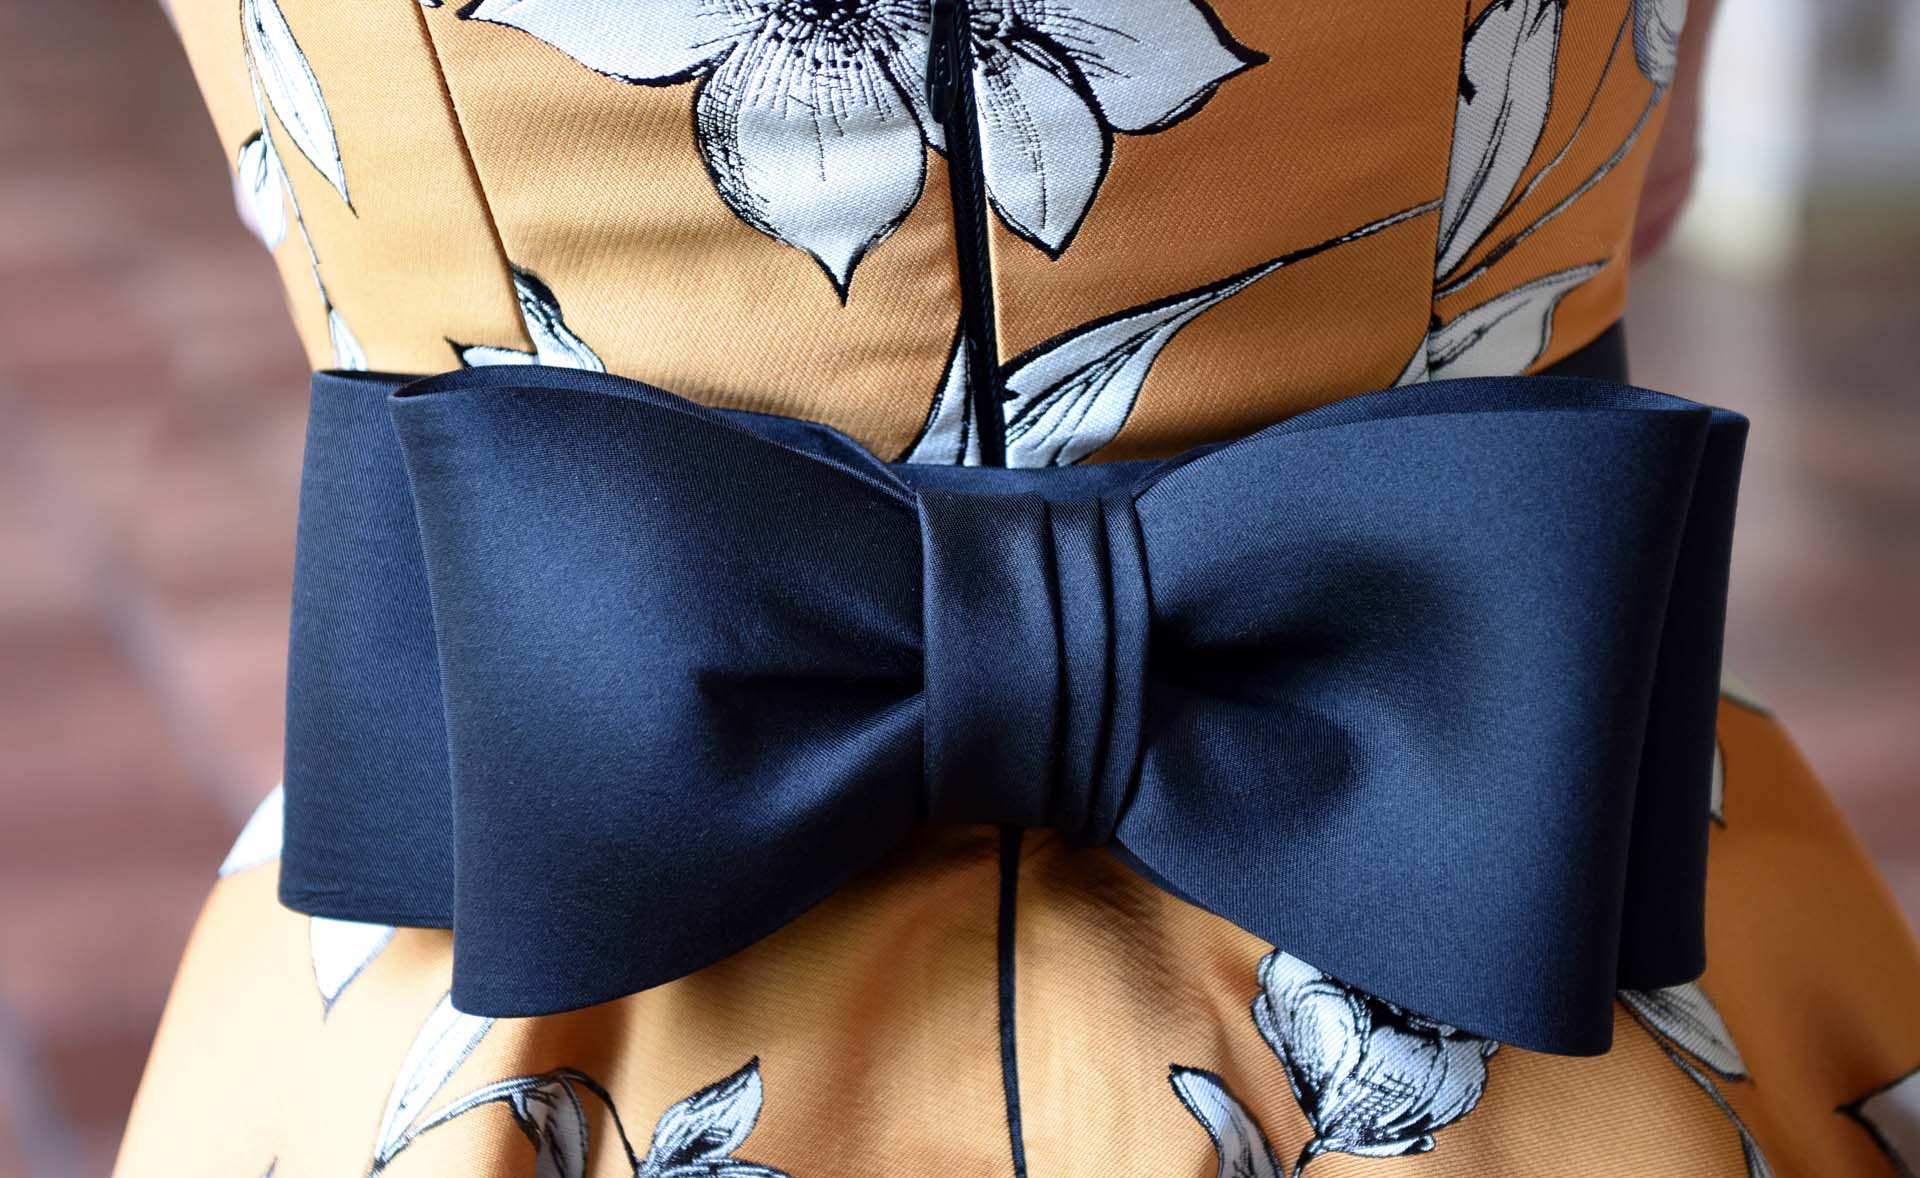 Orange dress with white floral detail and navy blue accent bow